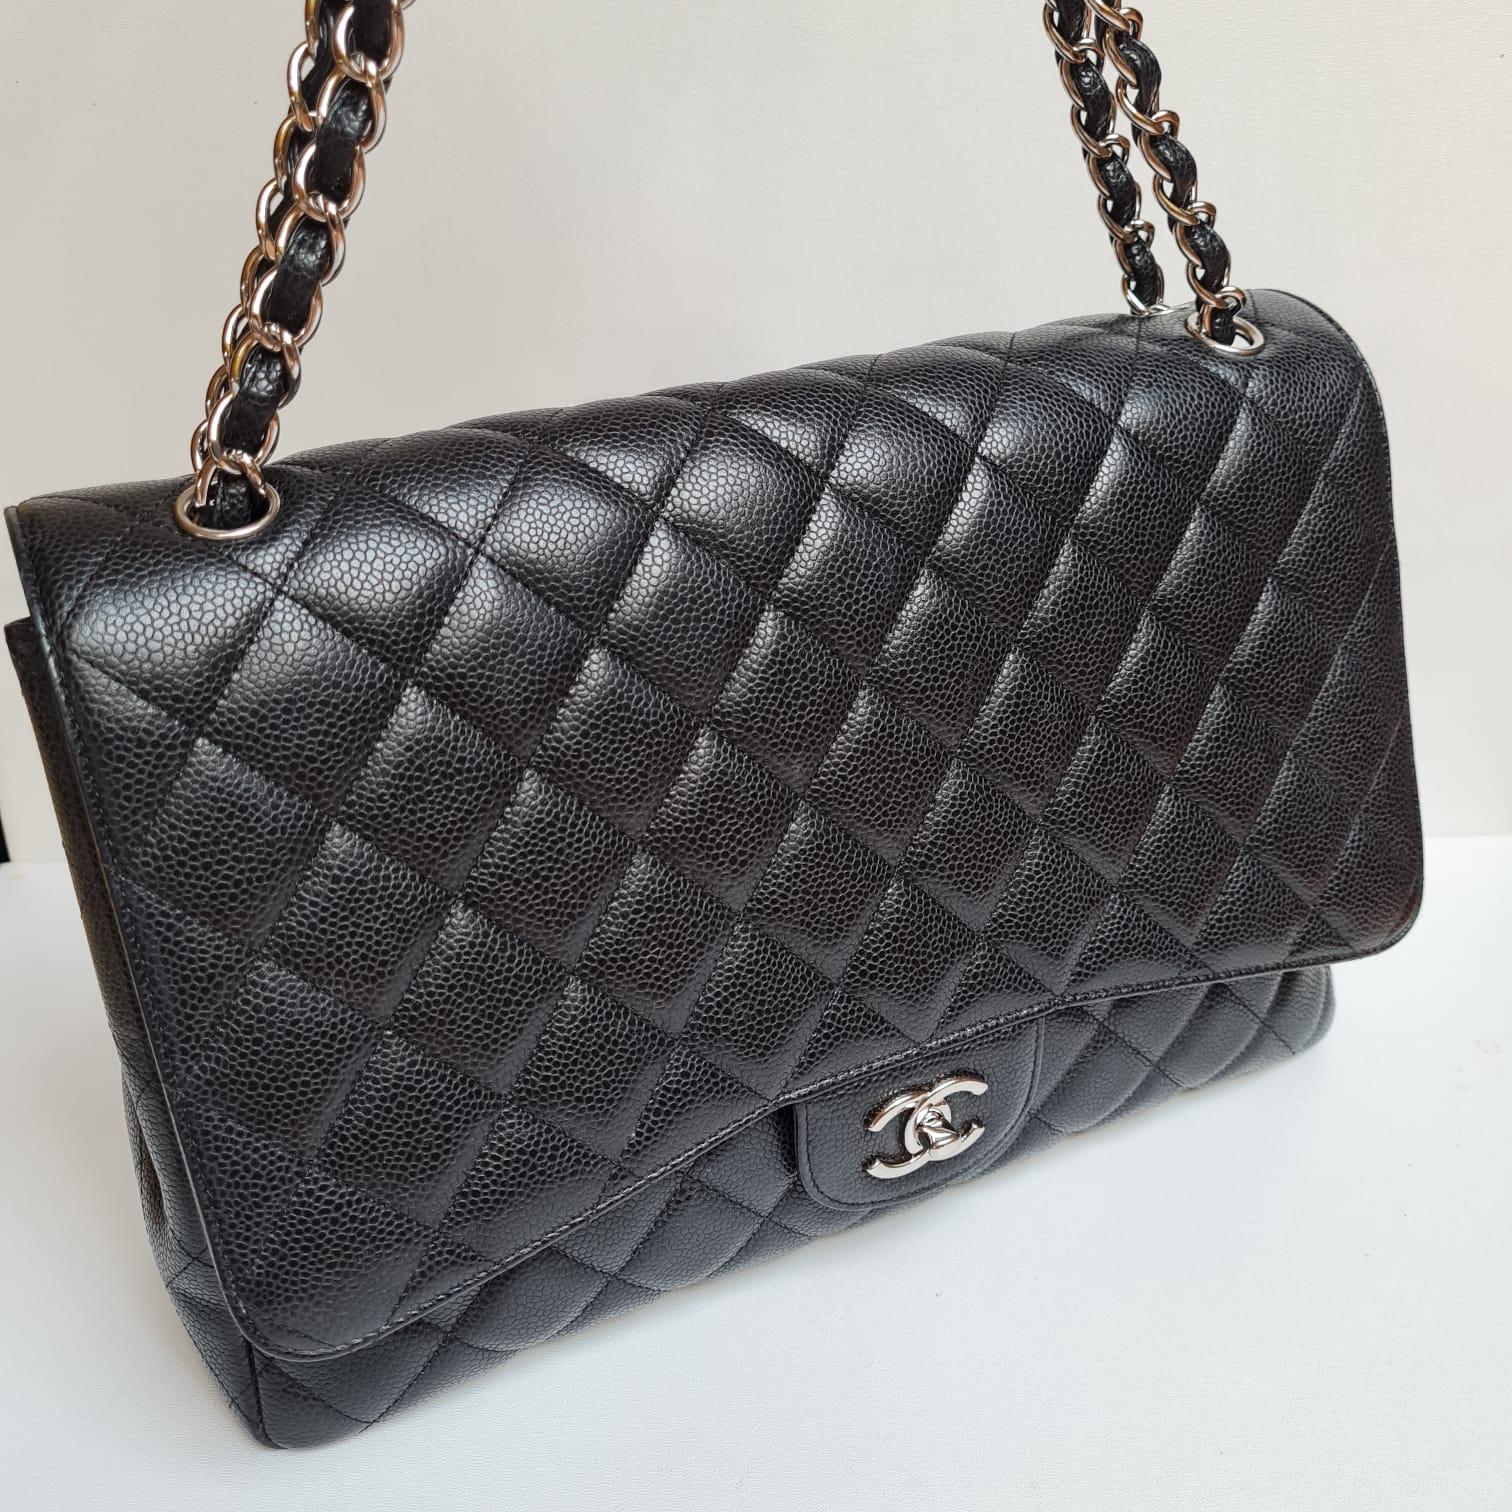 Chanel Black Maxi Caviar Leather Quilted Single Flap Bag 3